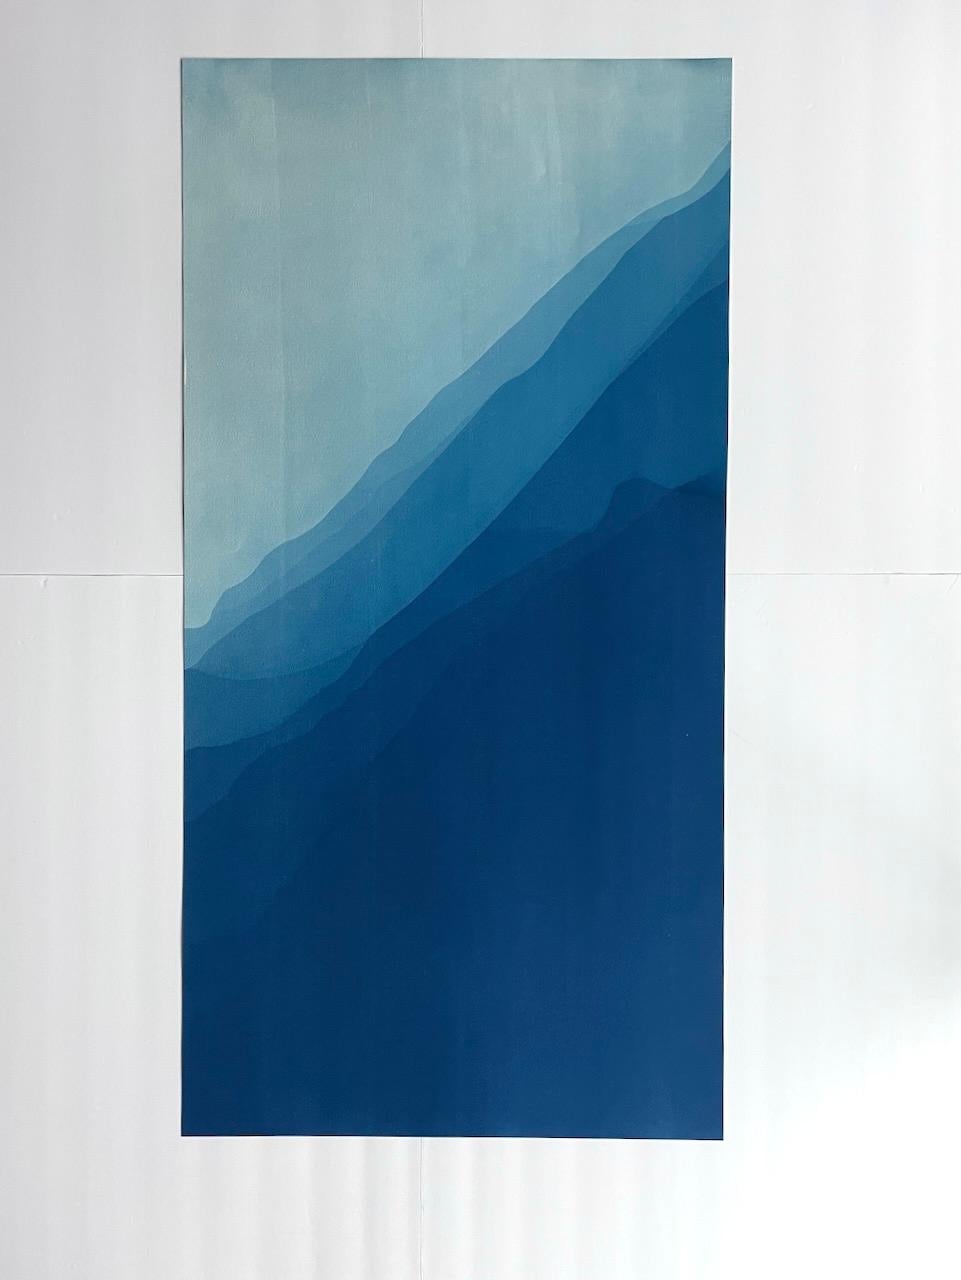 Sea Cliffs 7 (Hand-printed 40 x 20 inch abstract cyanotype) For Sale 2